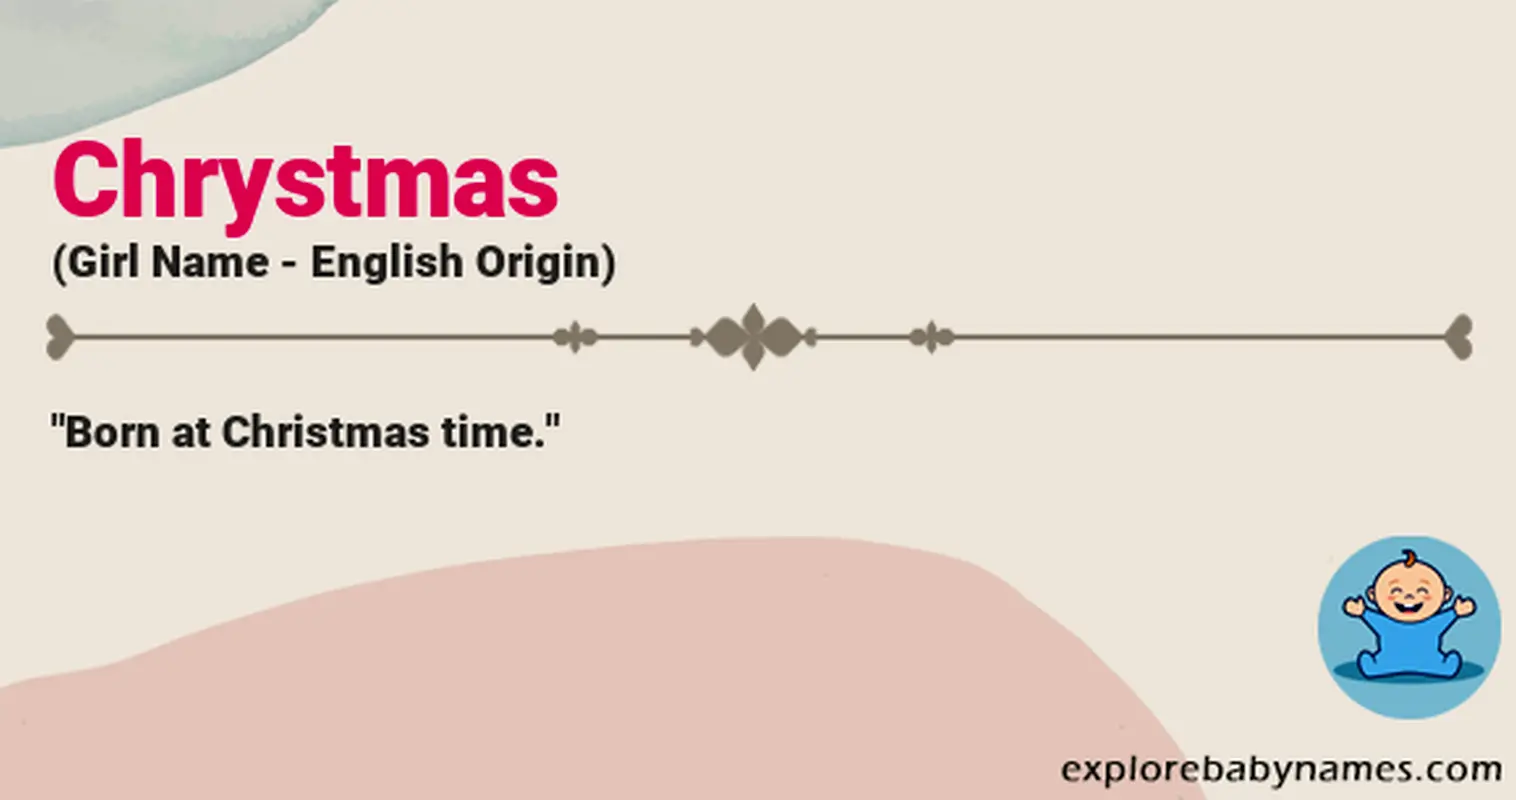 Meaning of Chrystmas